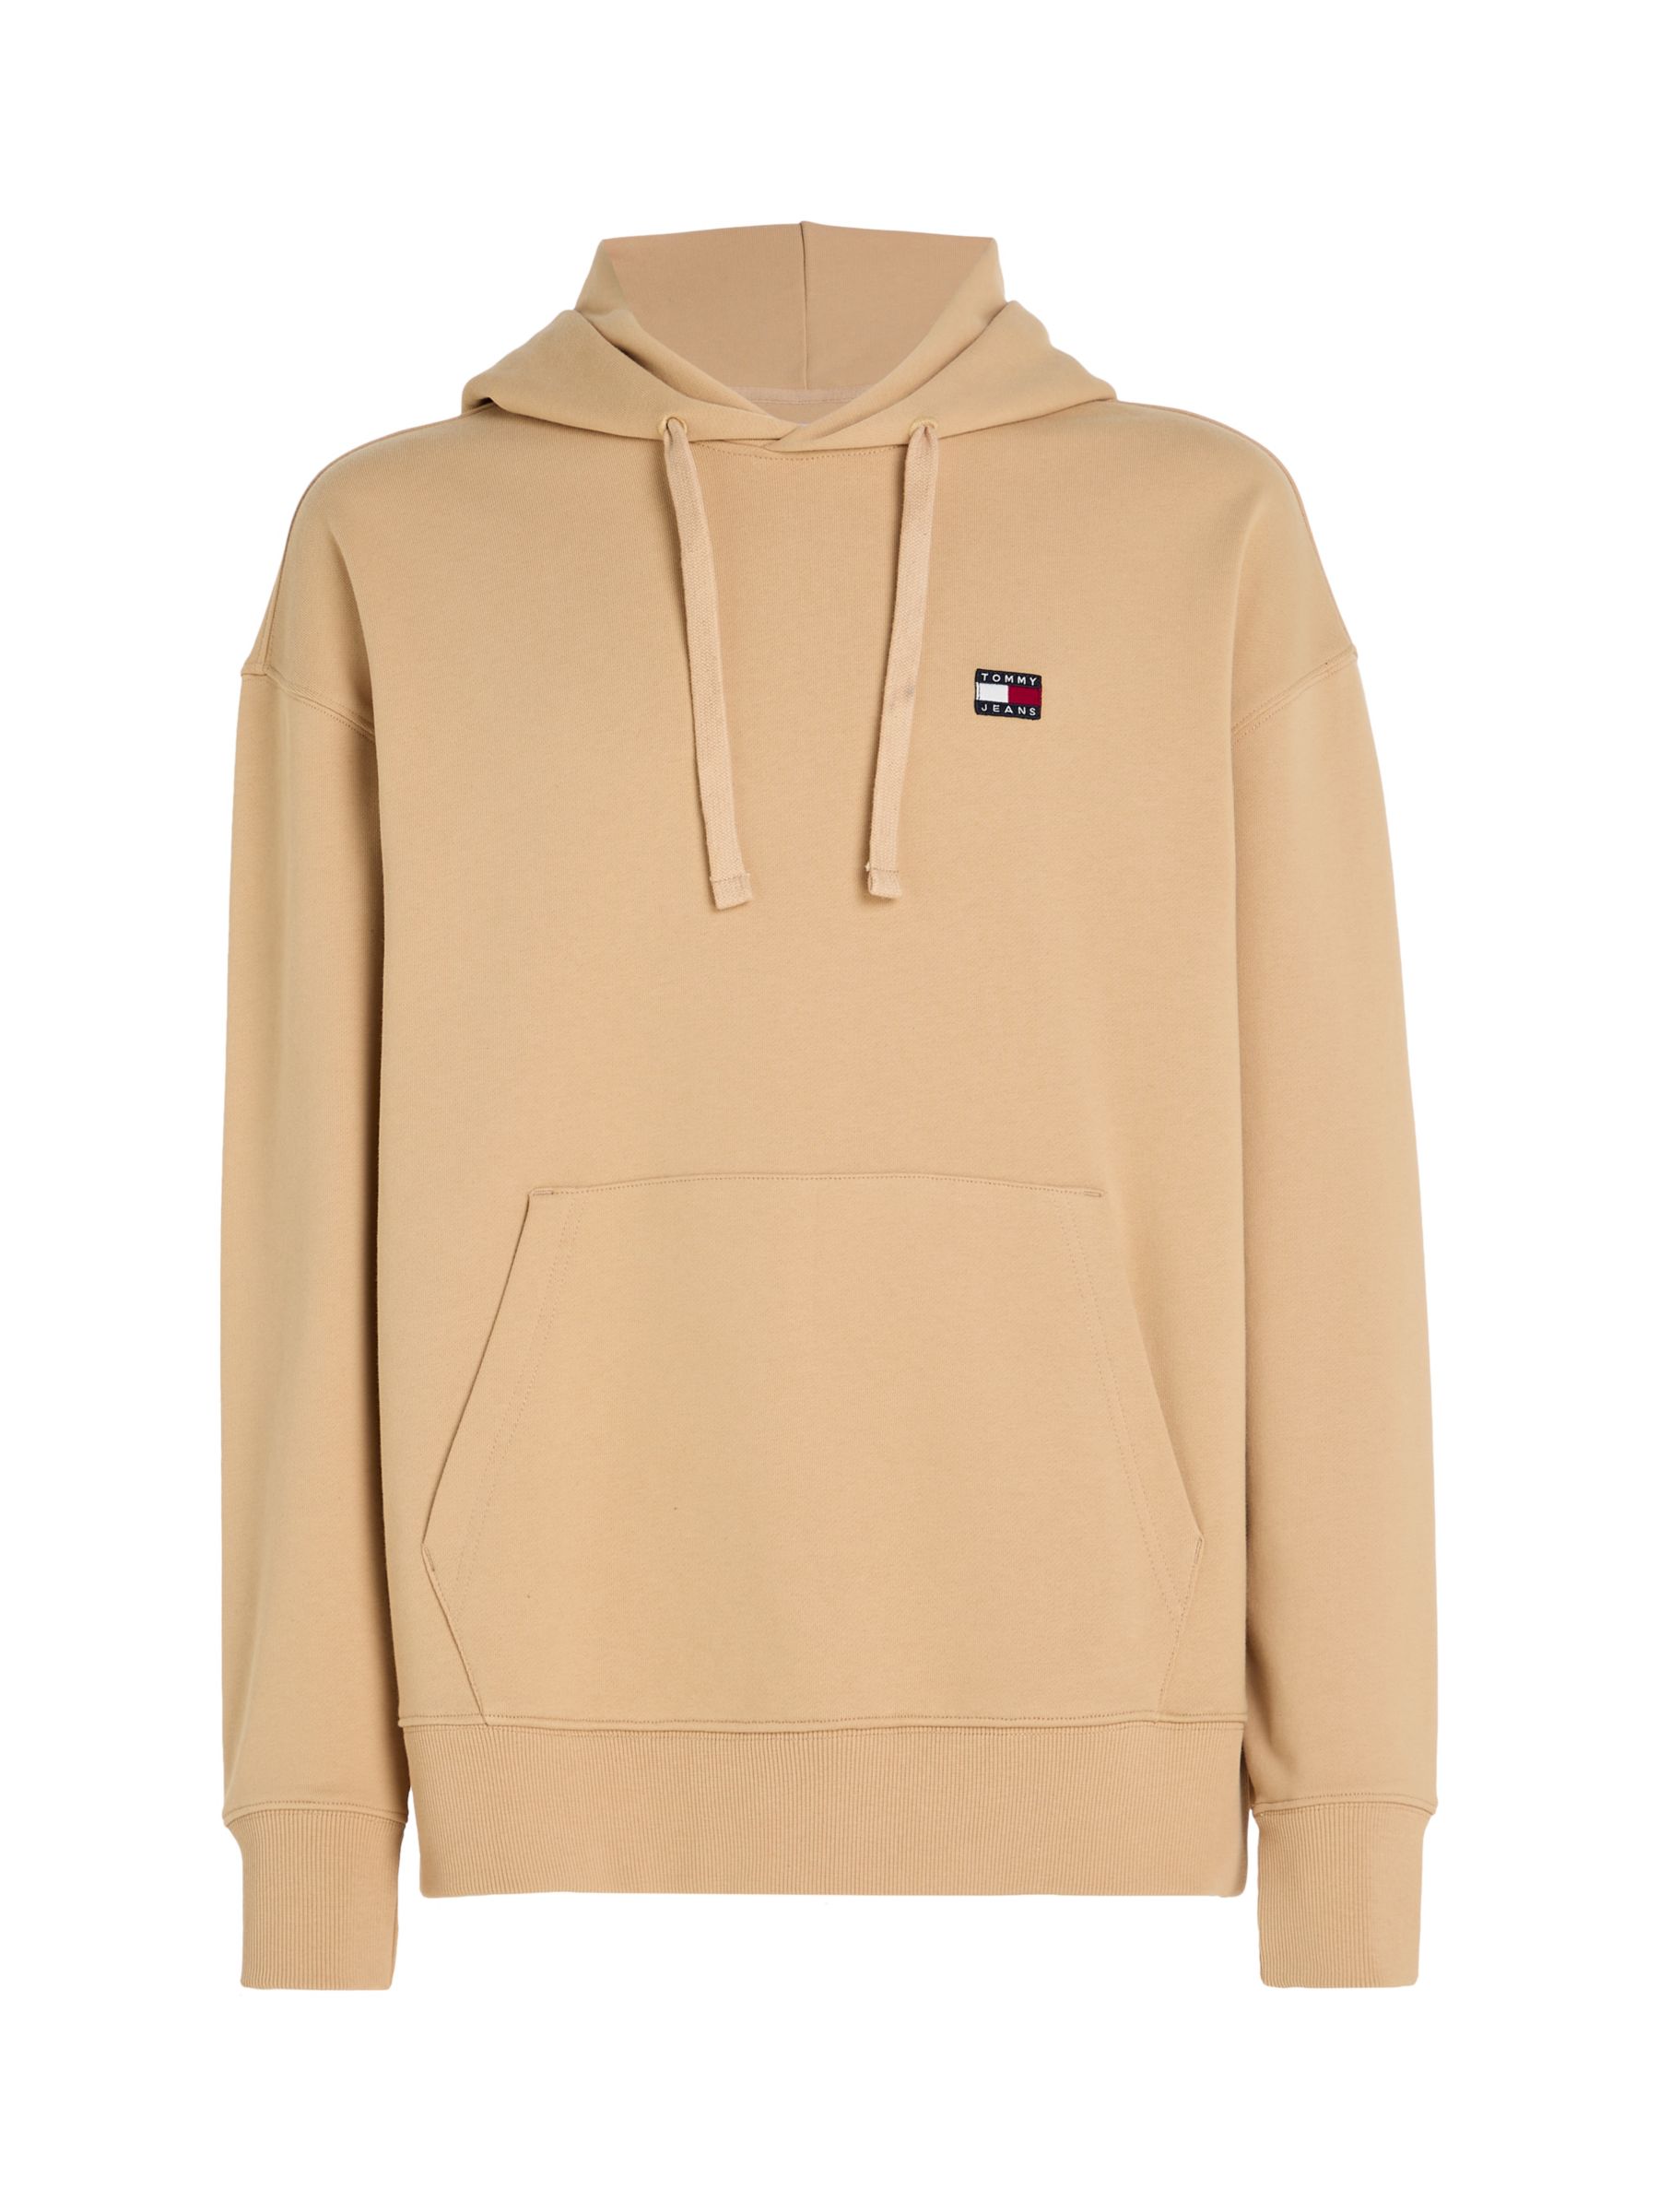 Tommy Hilfiger Logo Embroidered Hoodie, Tawny Sand, XS